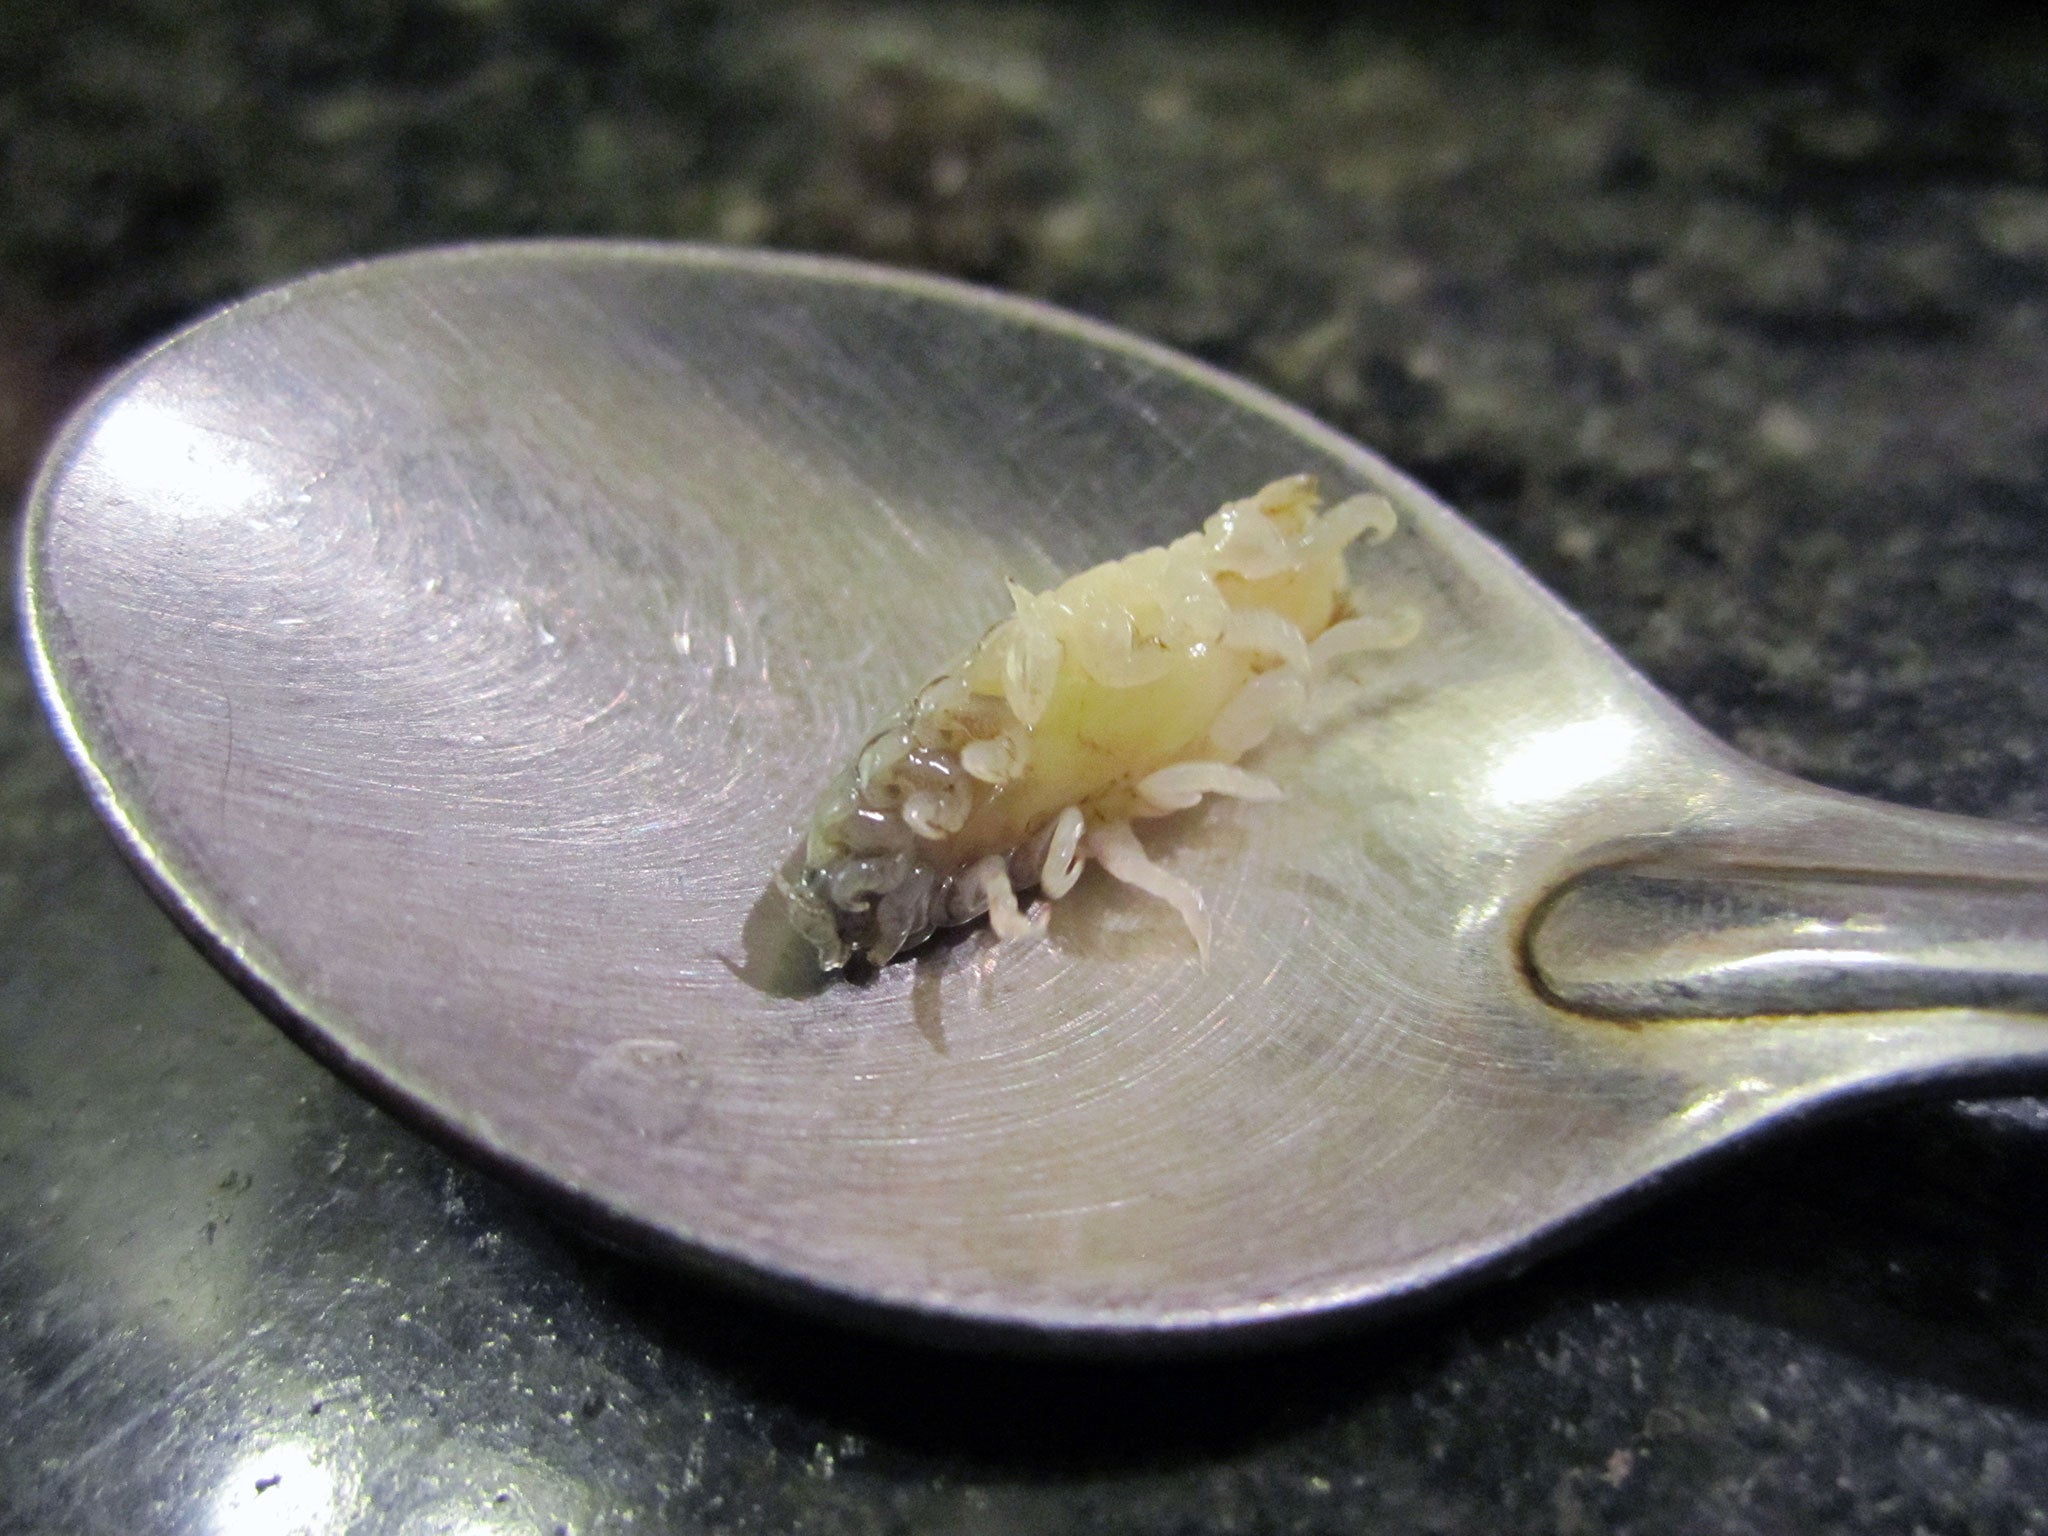 Man finds tongue-eating parasite in his Morrisons fish | The Independent